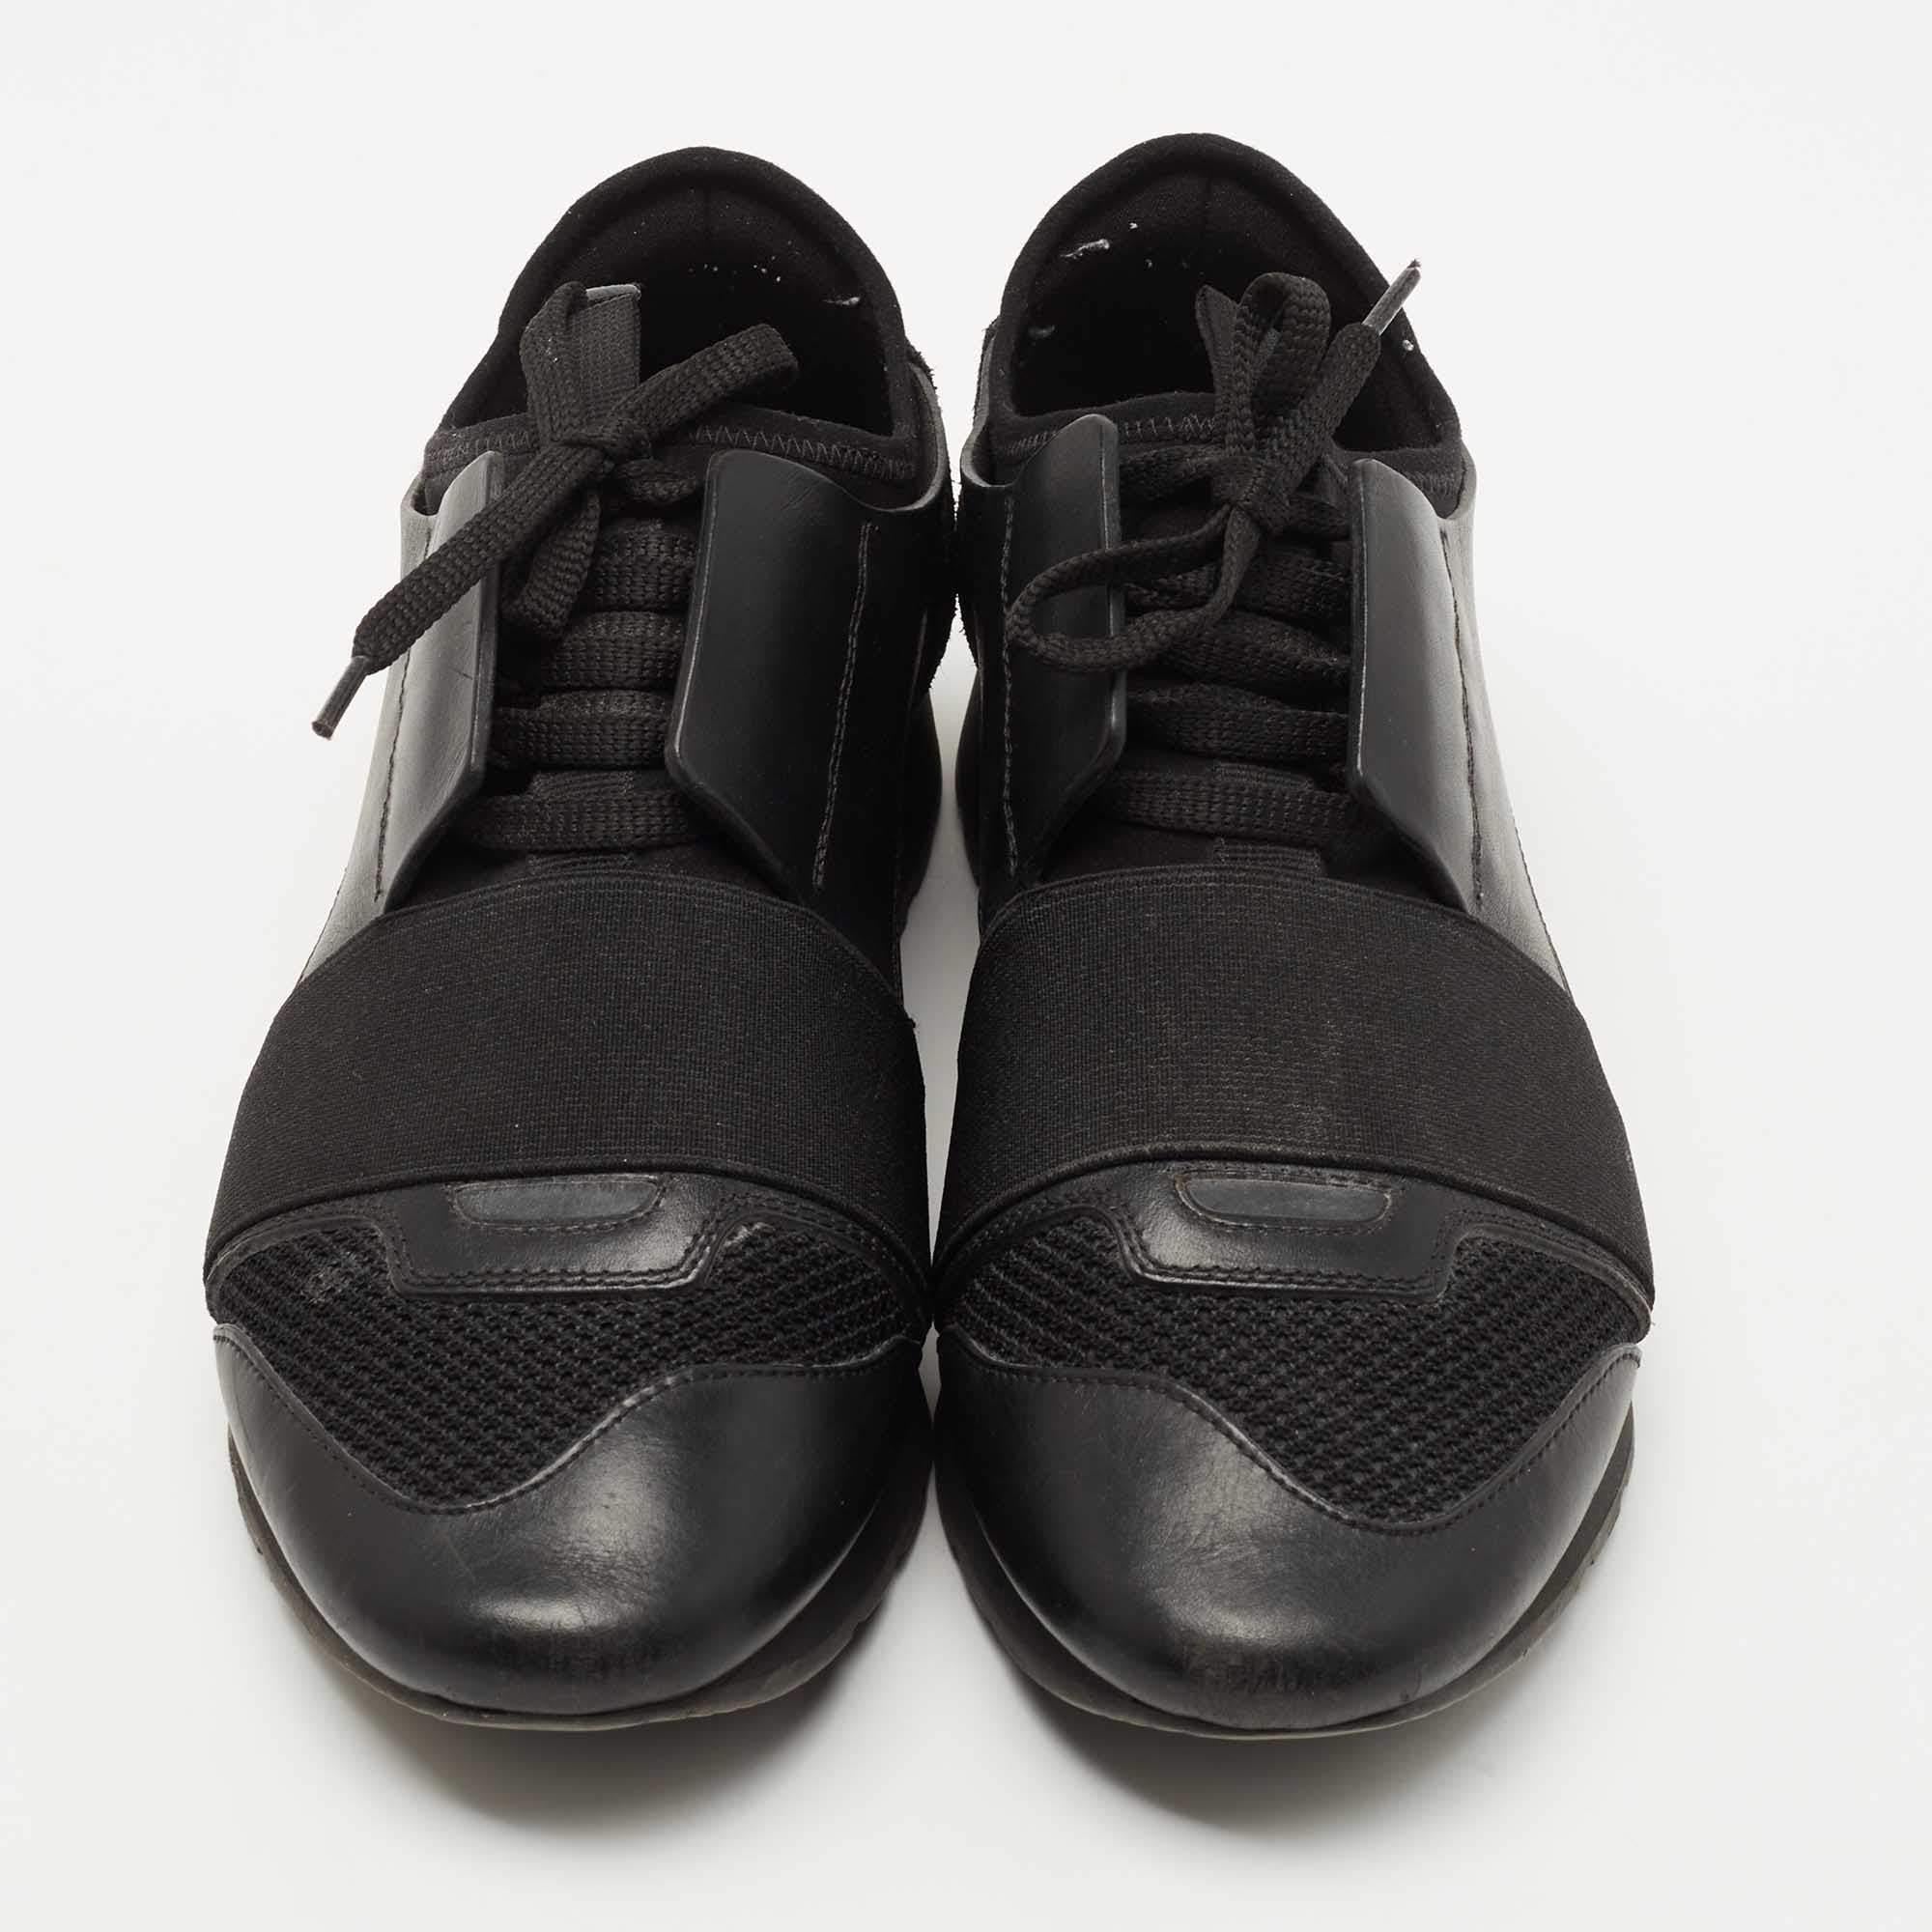 Let this comfortable pair be your first choice when you're out for a long day. These designer shoes have well-sewn uppers beautifully set on durable soles.

